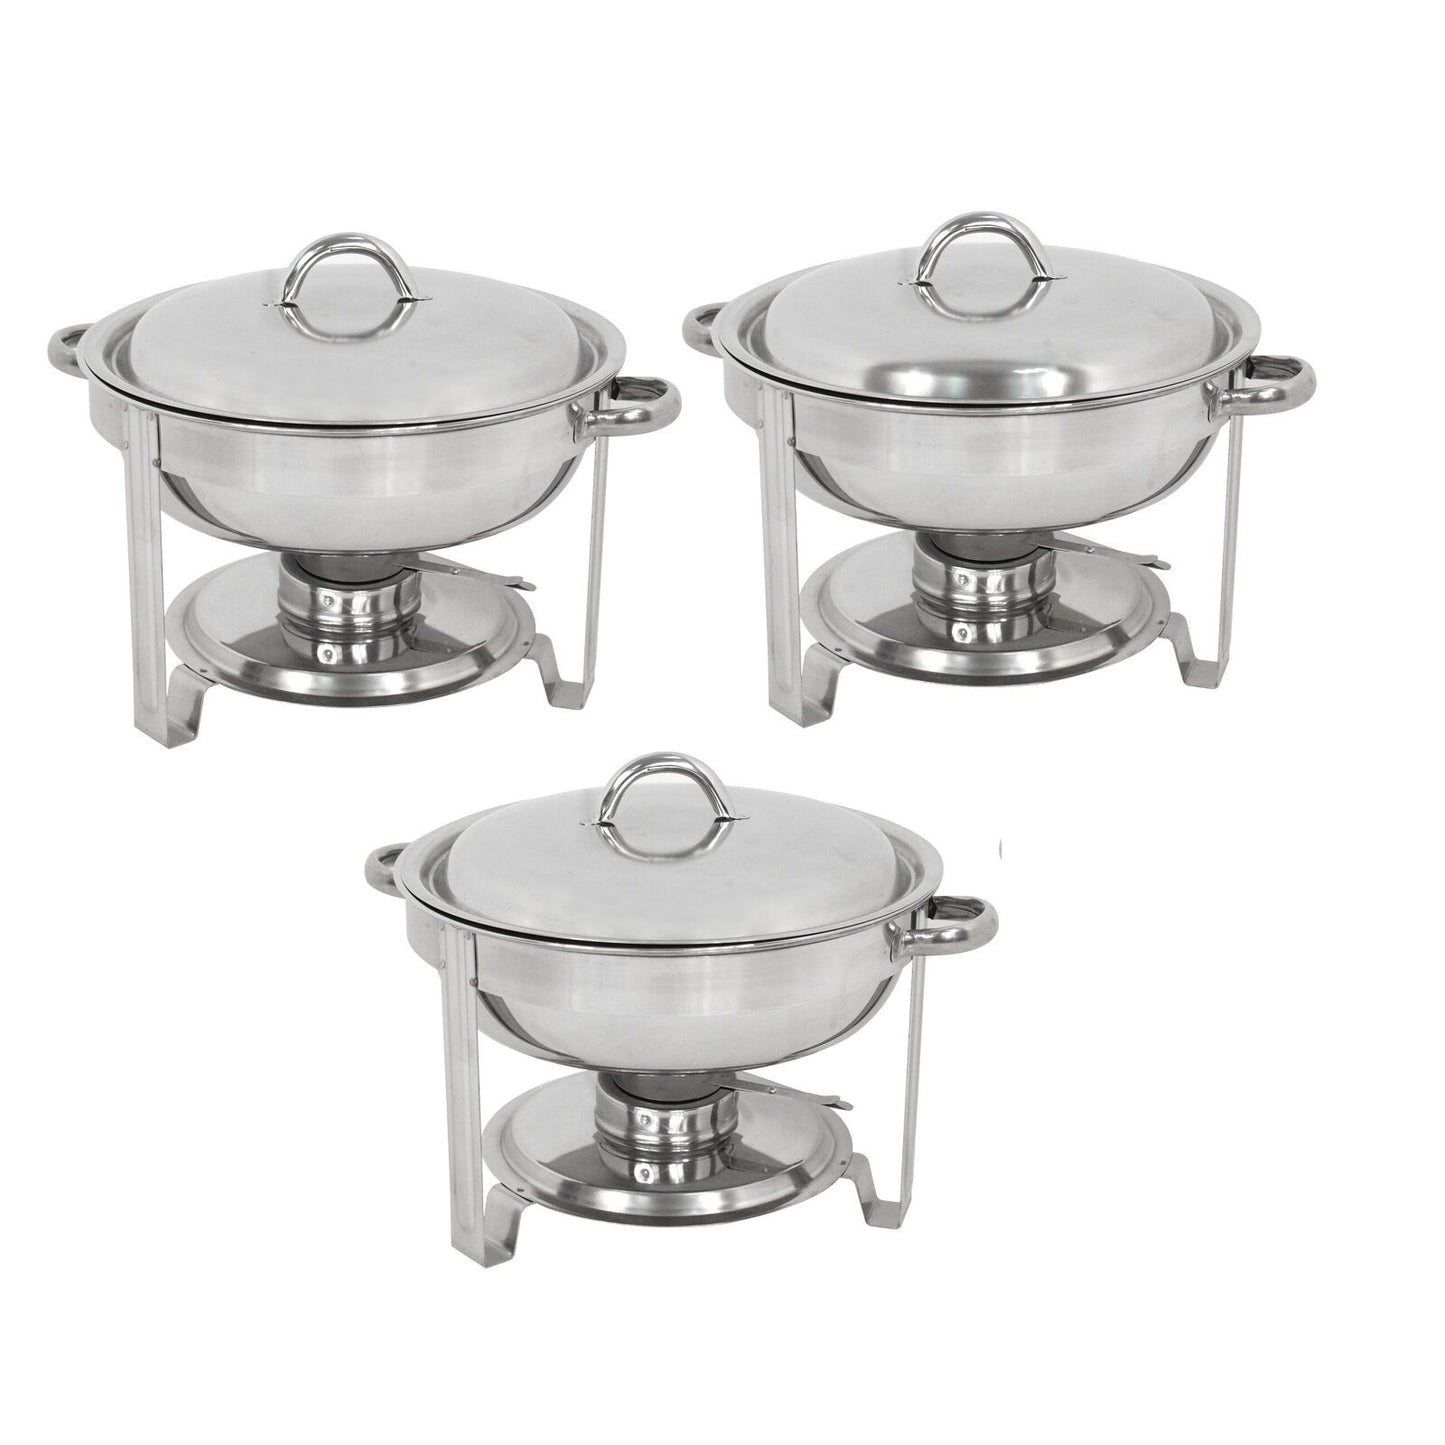 3 PACK CATERING STAINLESS STEEL CHAFER CHAFING DISH SETS 5 QT PARTY PACK